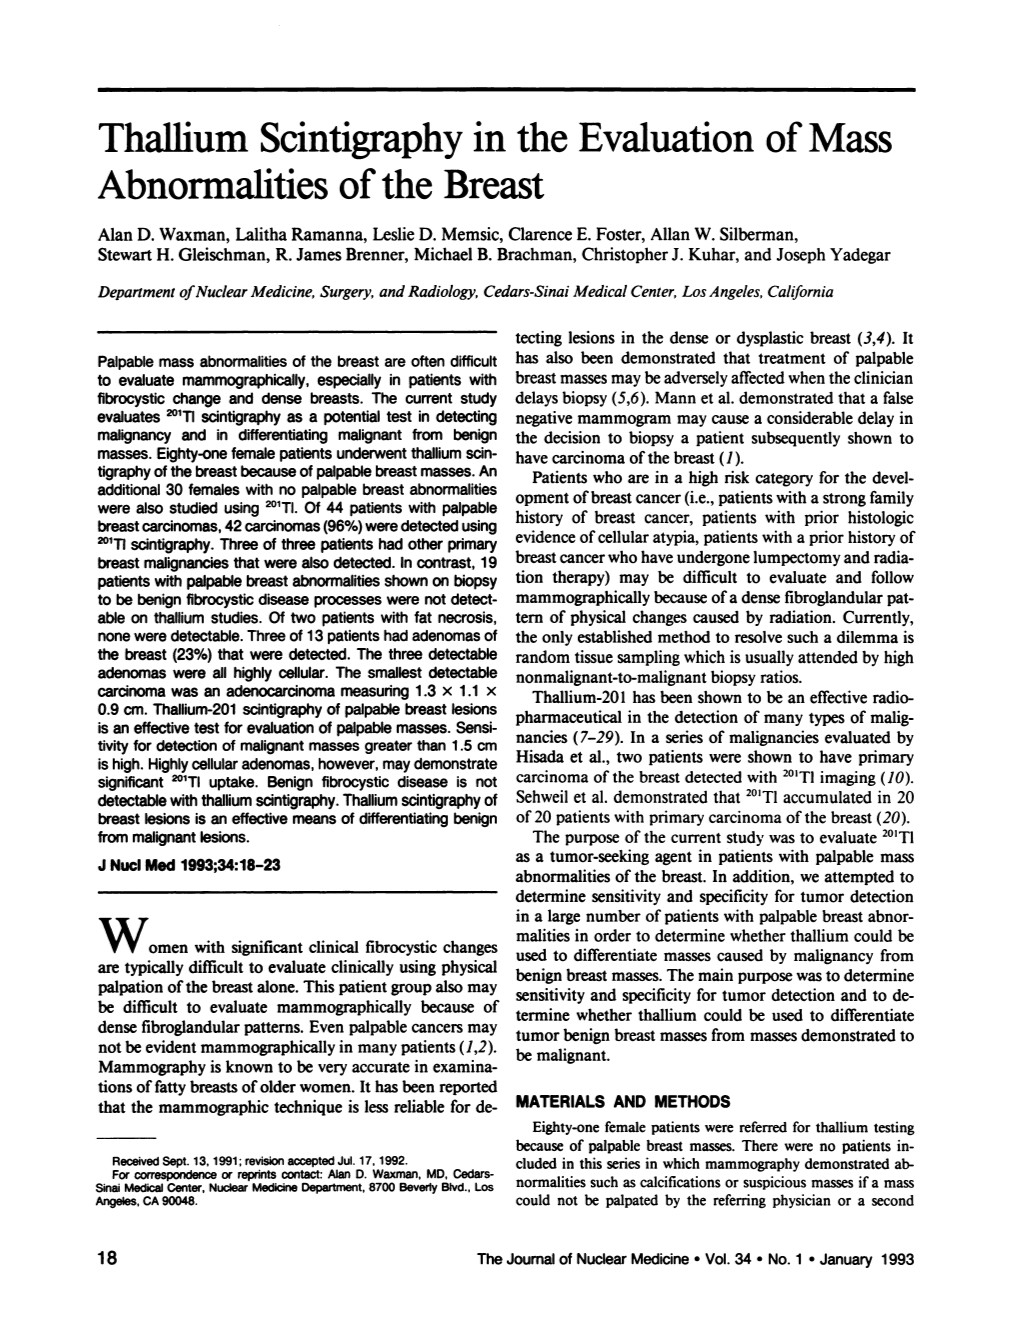 Abnormalities of the Breast